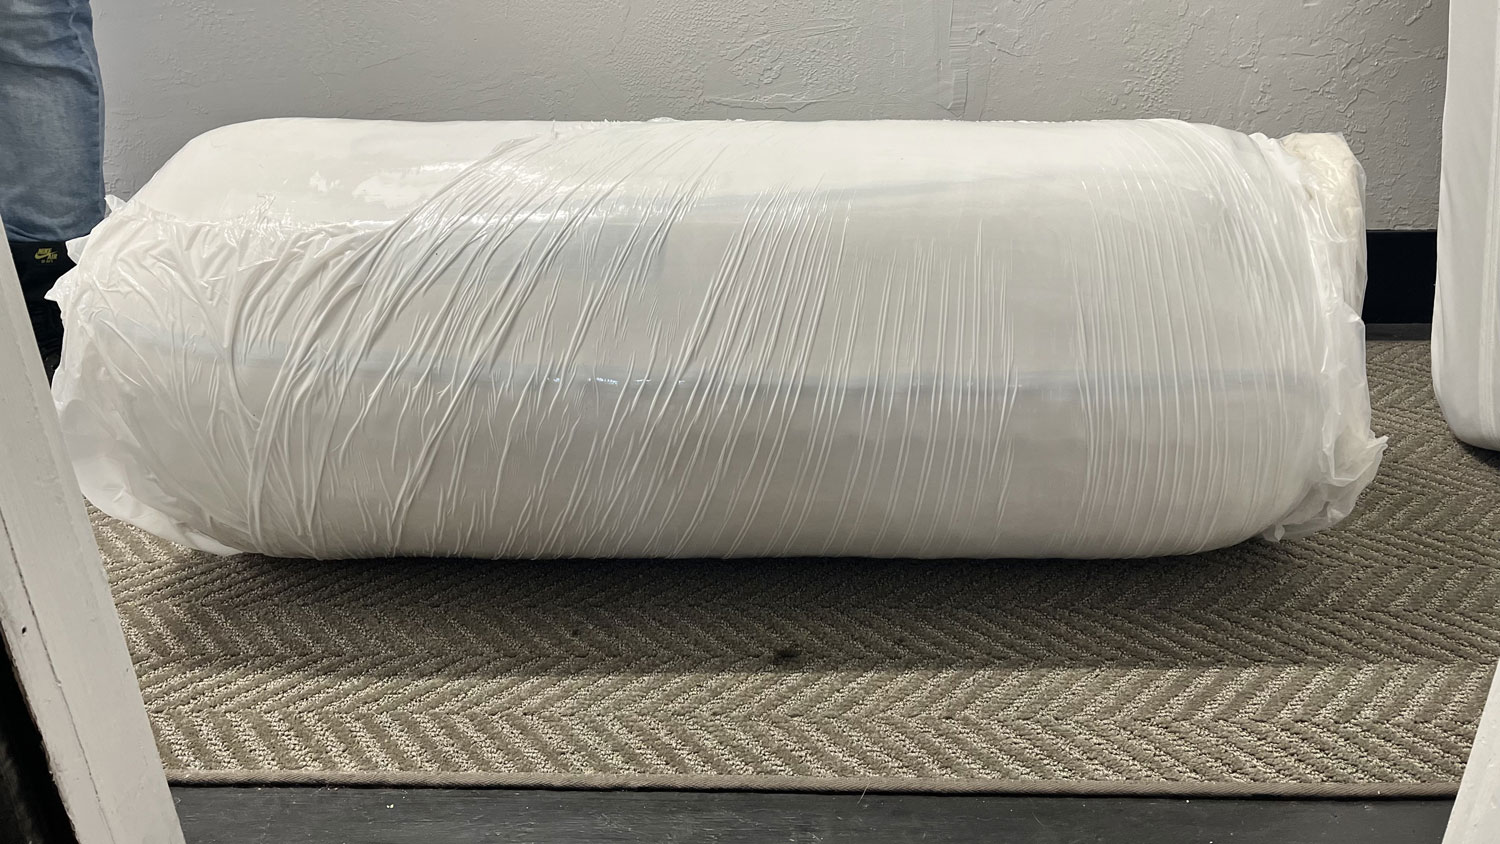 The Avocado Green mattress rolled up in plastic